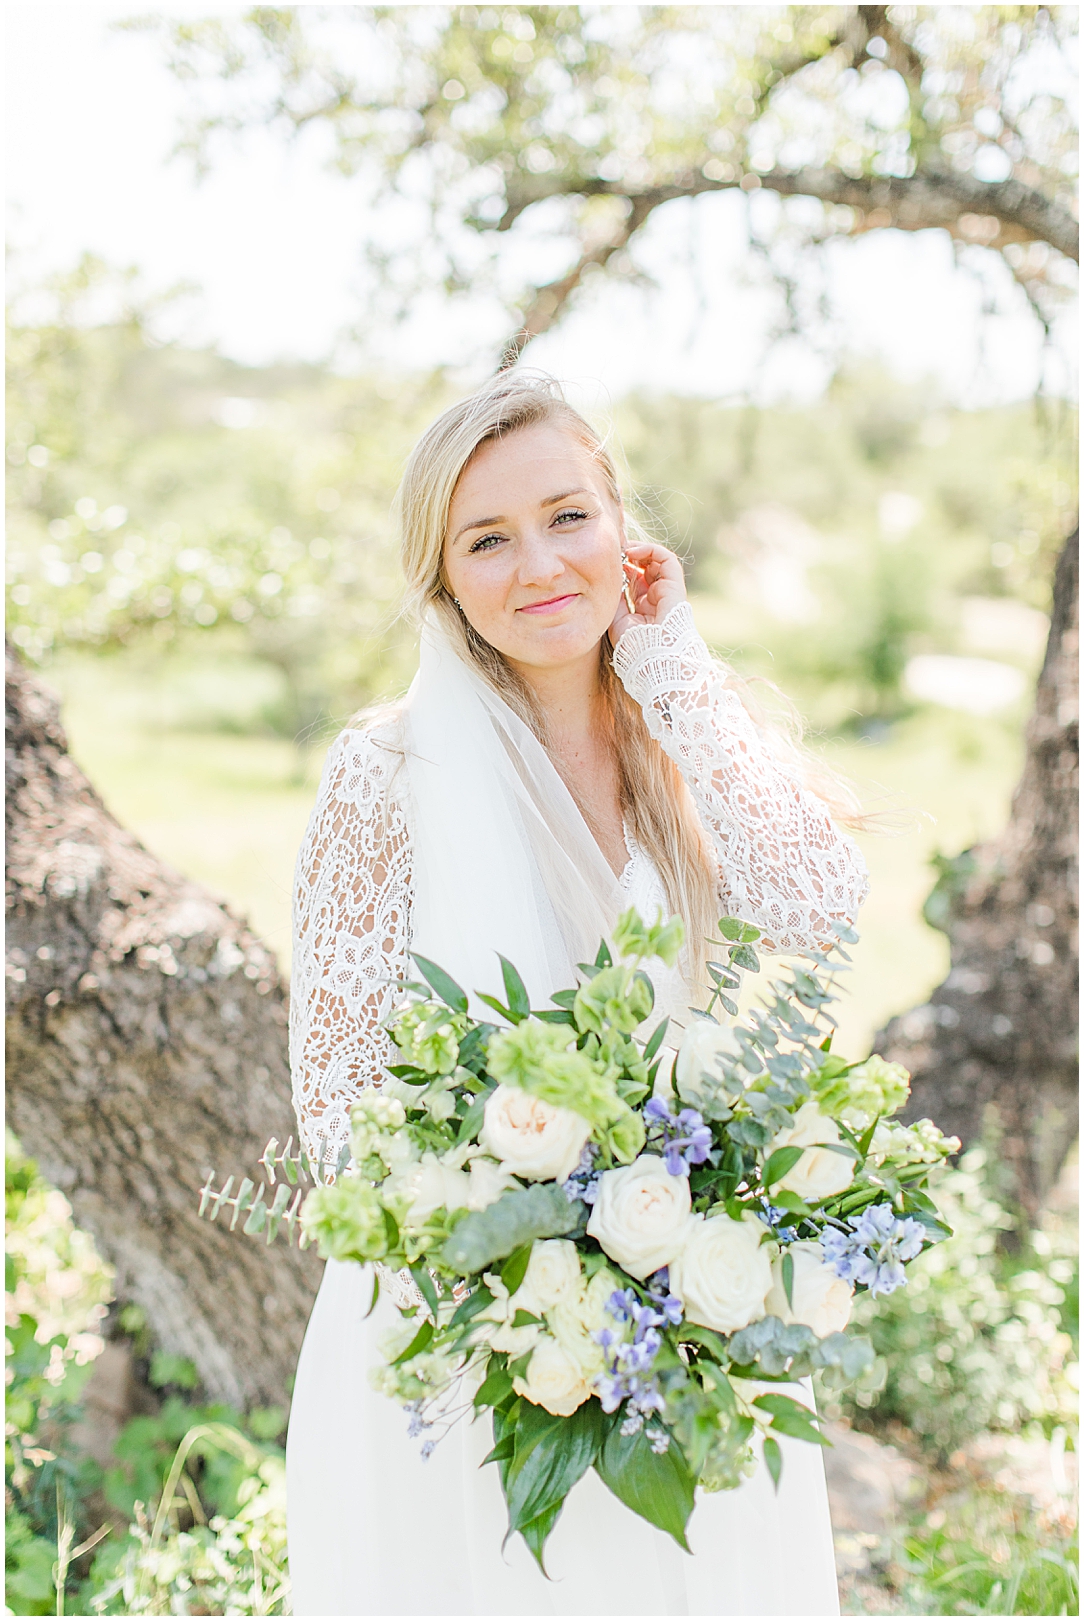 An Intimate elopement for two in Dripping Springs Texas by Allison Jeffers Photography 0059